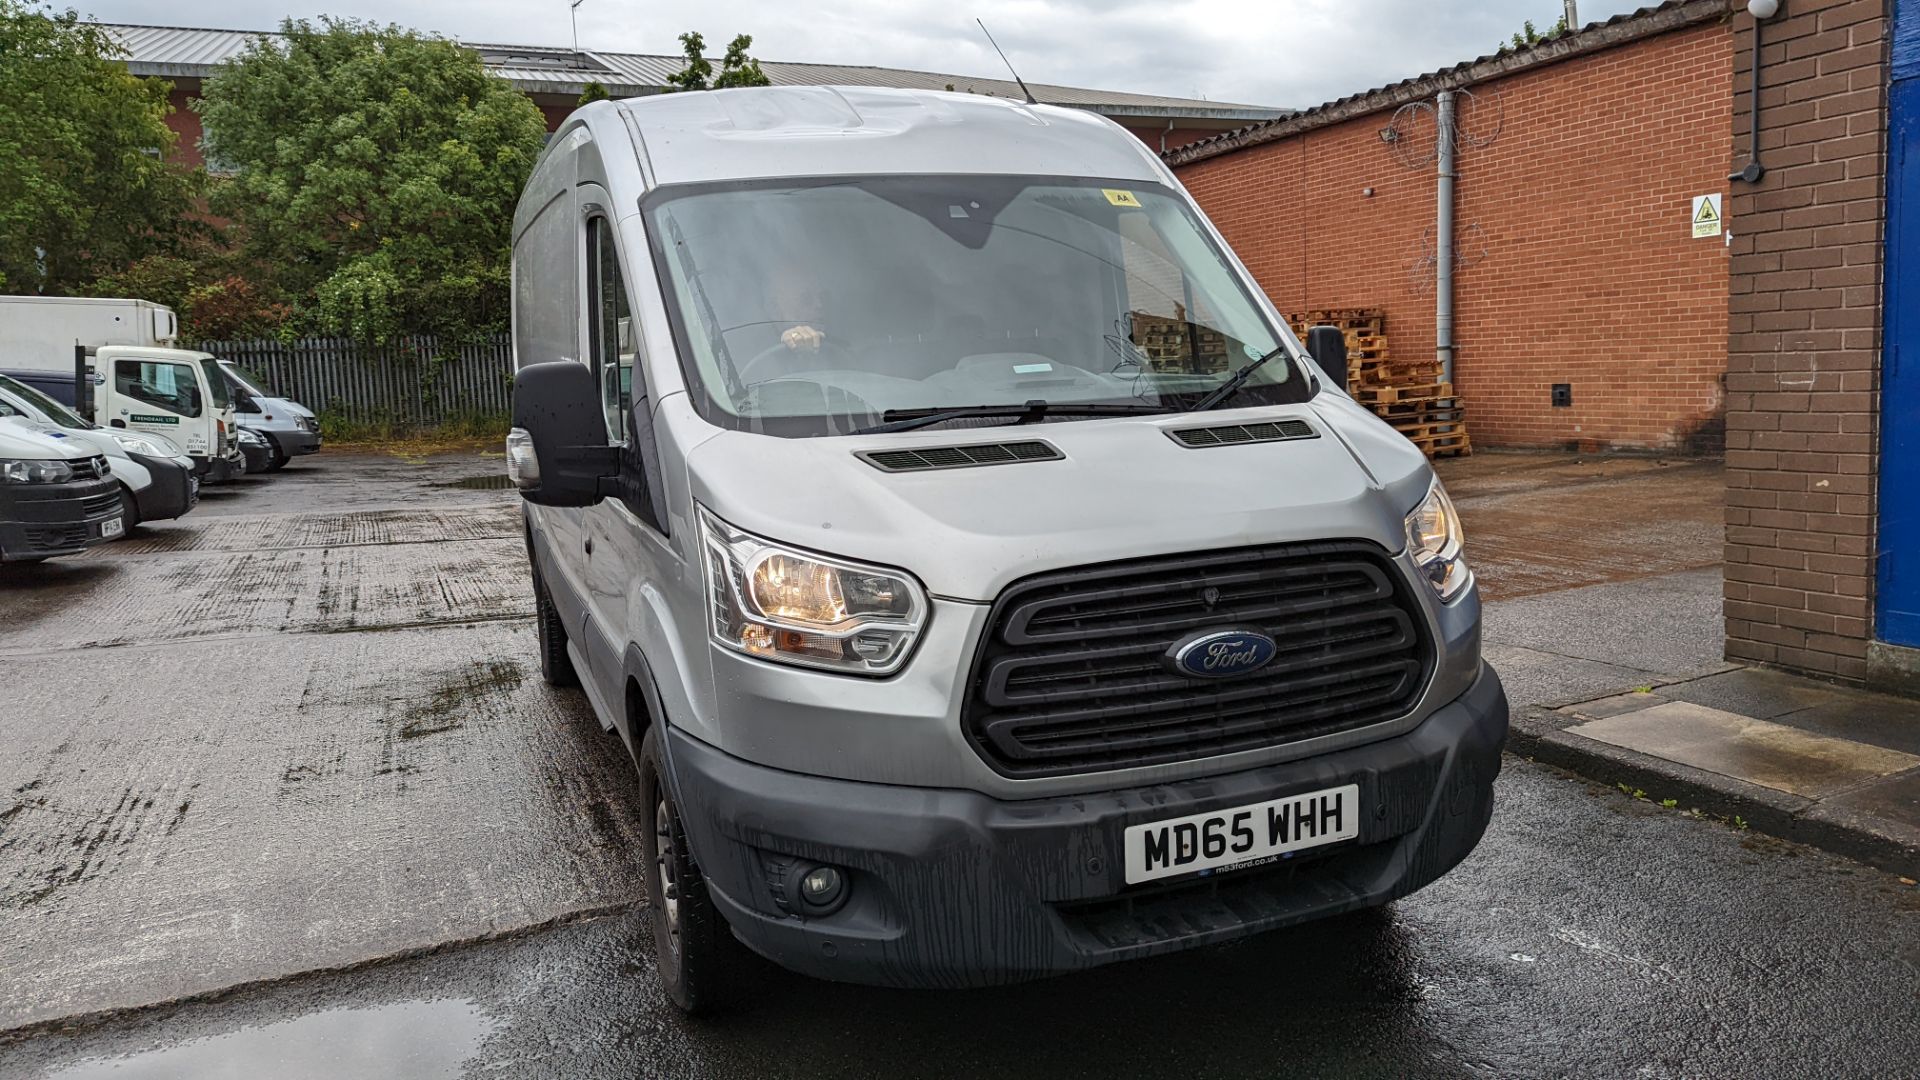 MD65 WHH Ford Transit 350, 6-speed manual gearbox, 2198cc diesel engine, 5981mm x 2550mm. Colour: Si - Image 4 of 51